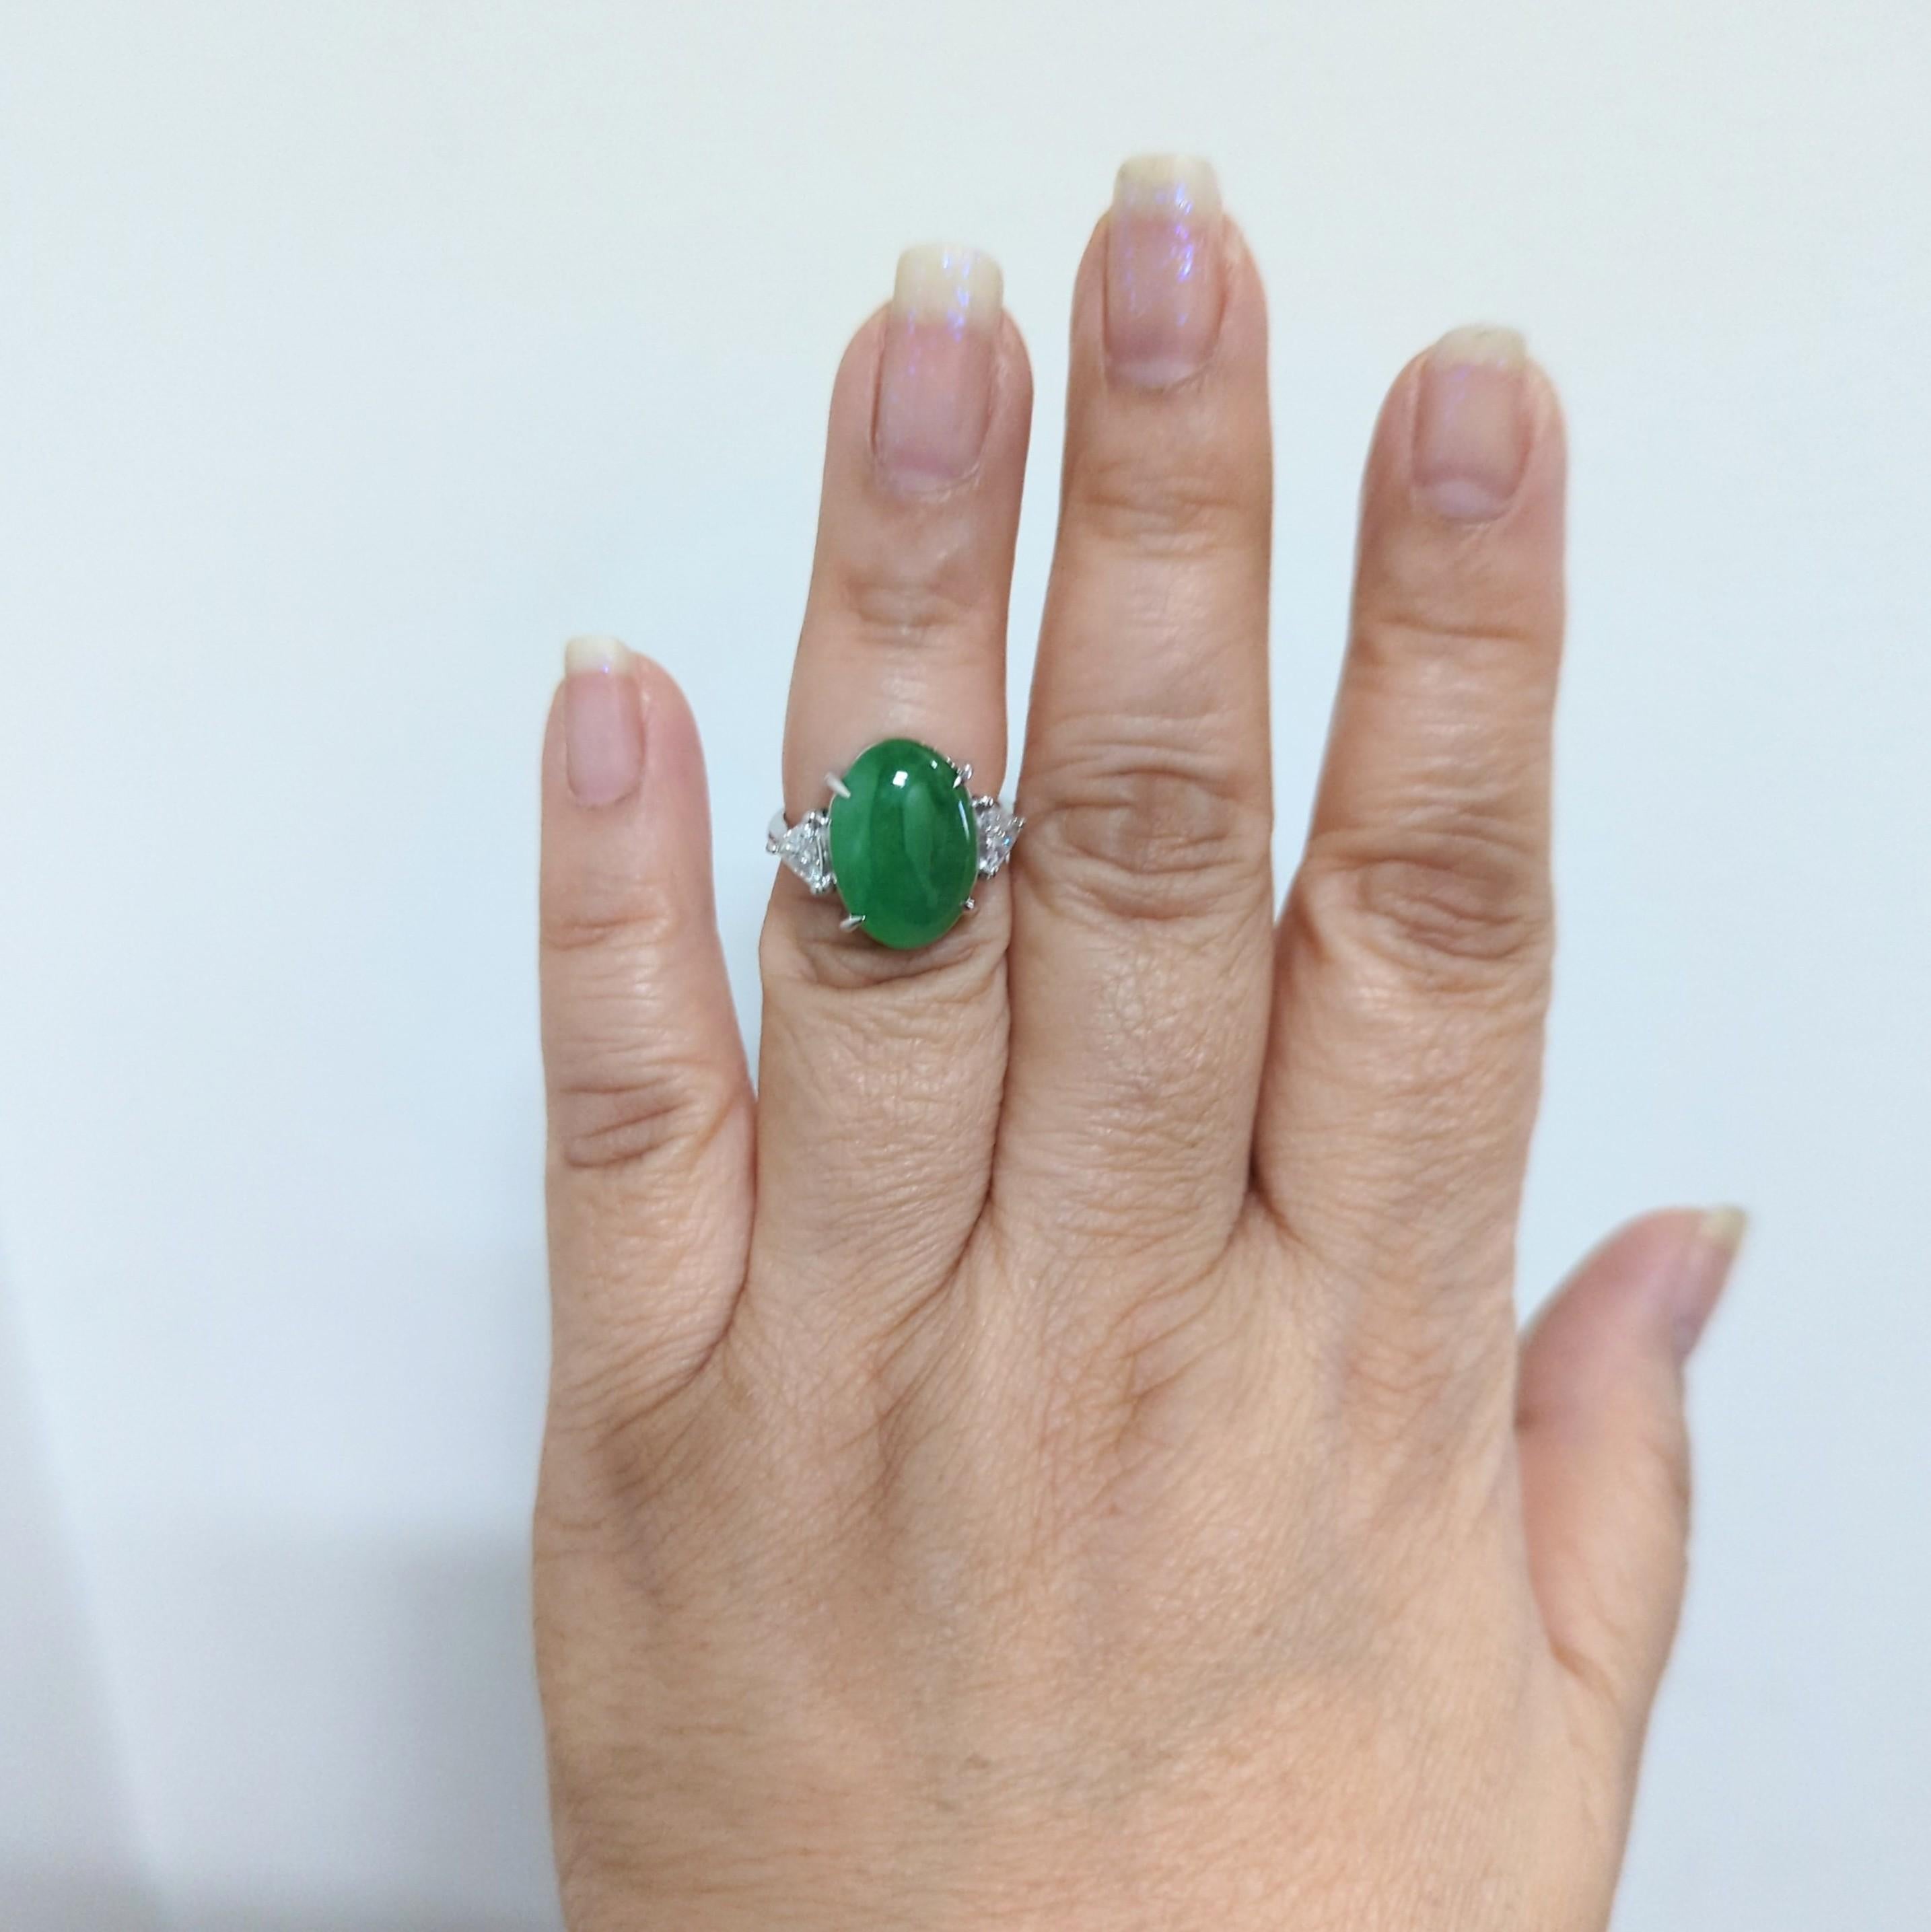 Beautiful 7.90 ct. green jade oval cabochon with 0.50 ct. good quality white diamond trillions.  Handmade in platinum.  Ring size 6.